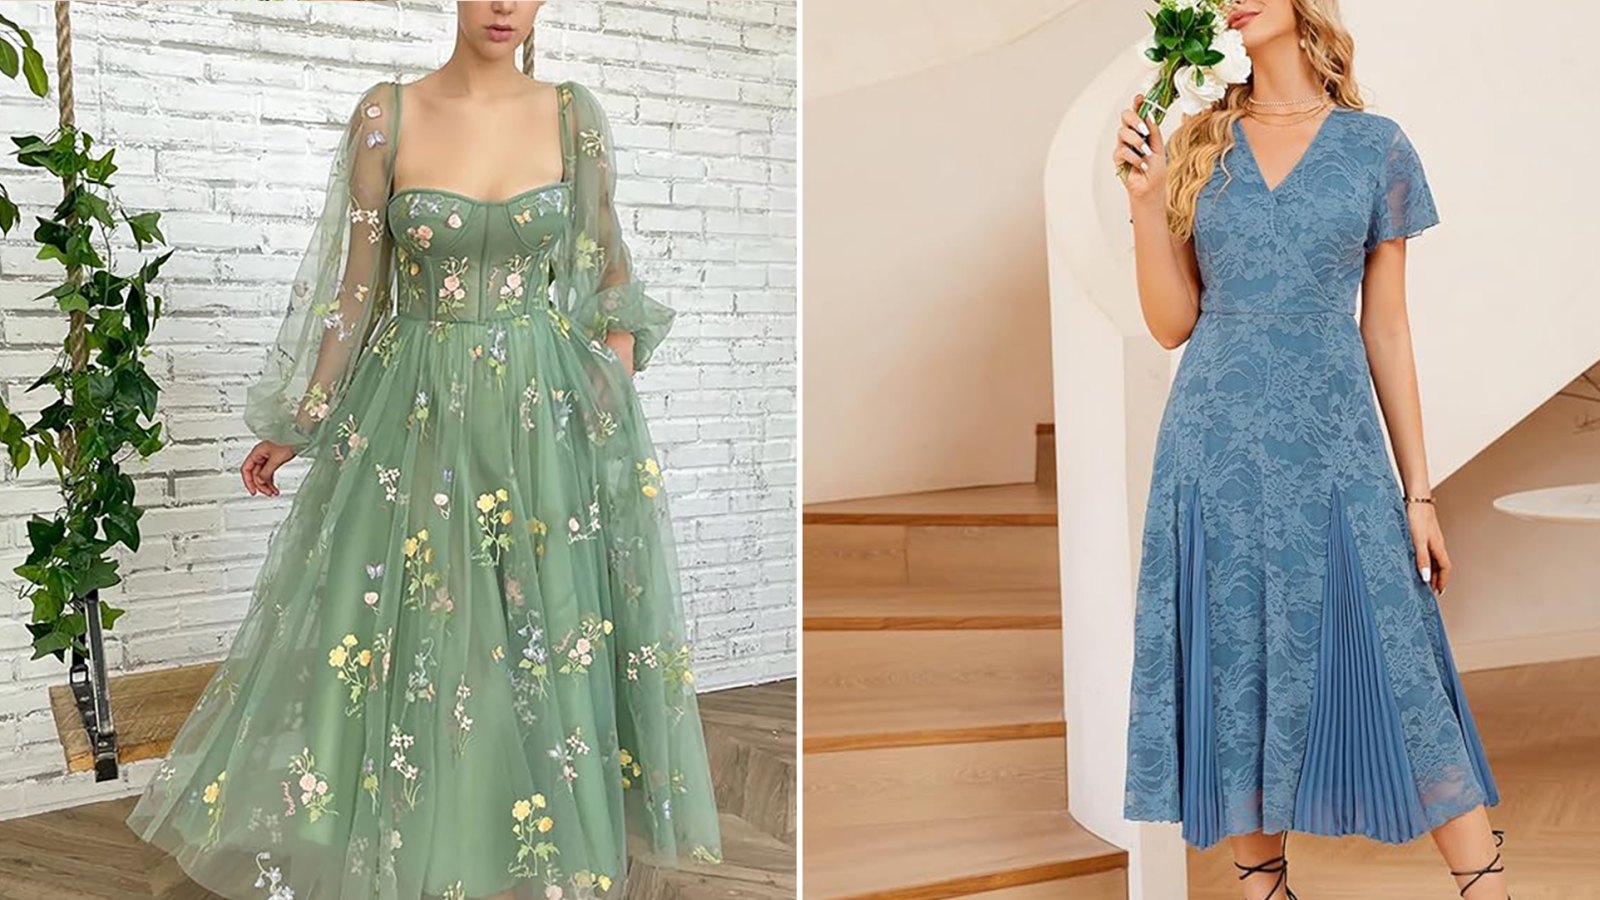 Nordstrom Rack Has Tons of Wedding Guest Looks for Less